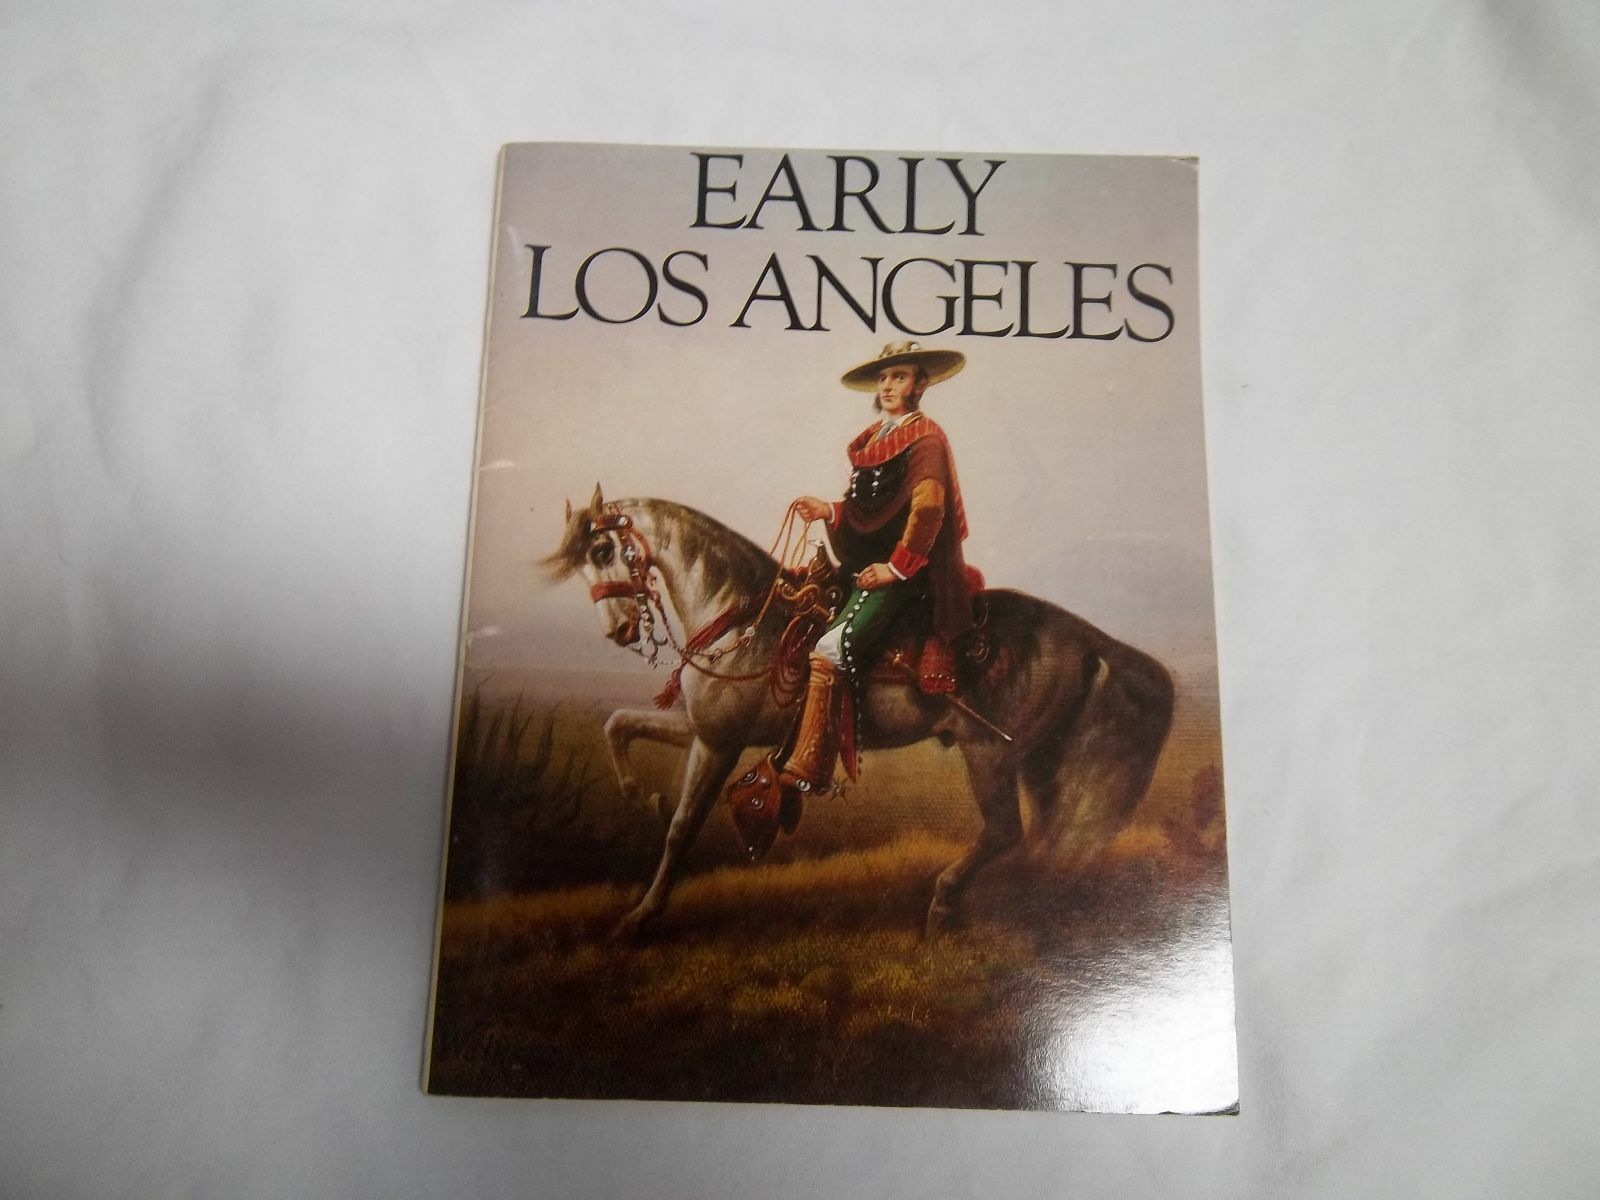 EARLY LOS ANGELES  PAPERBACK  BOOK